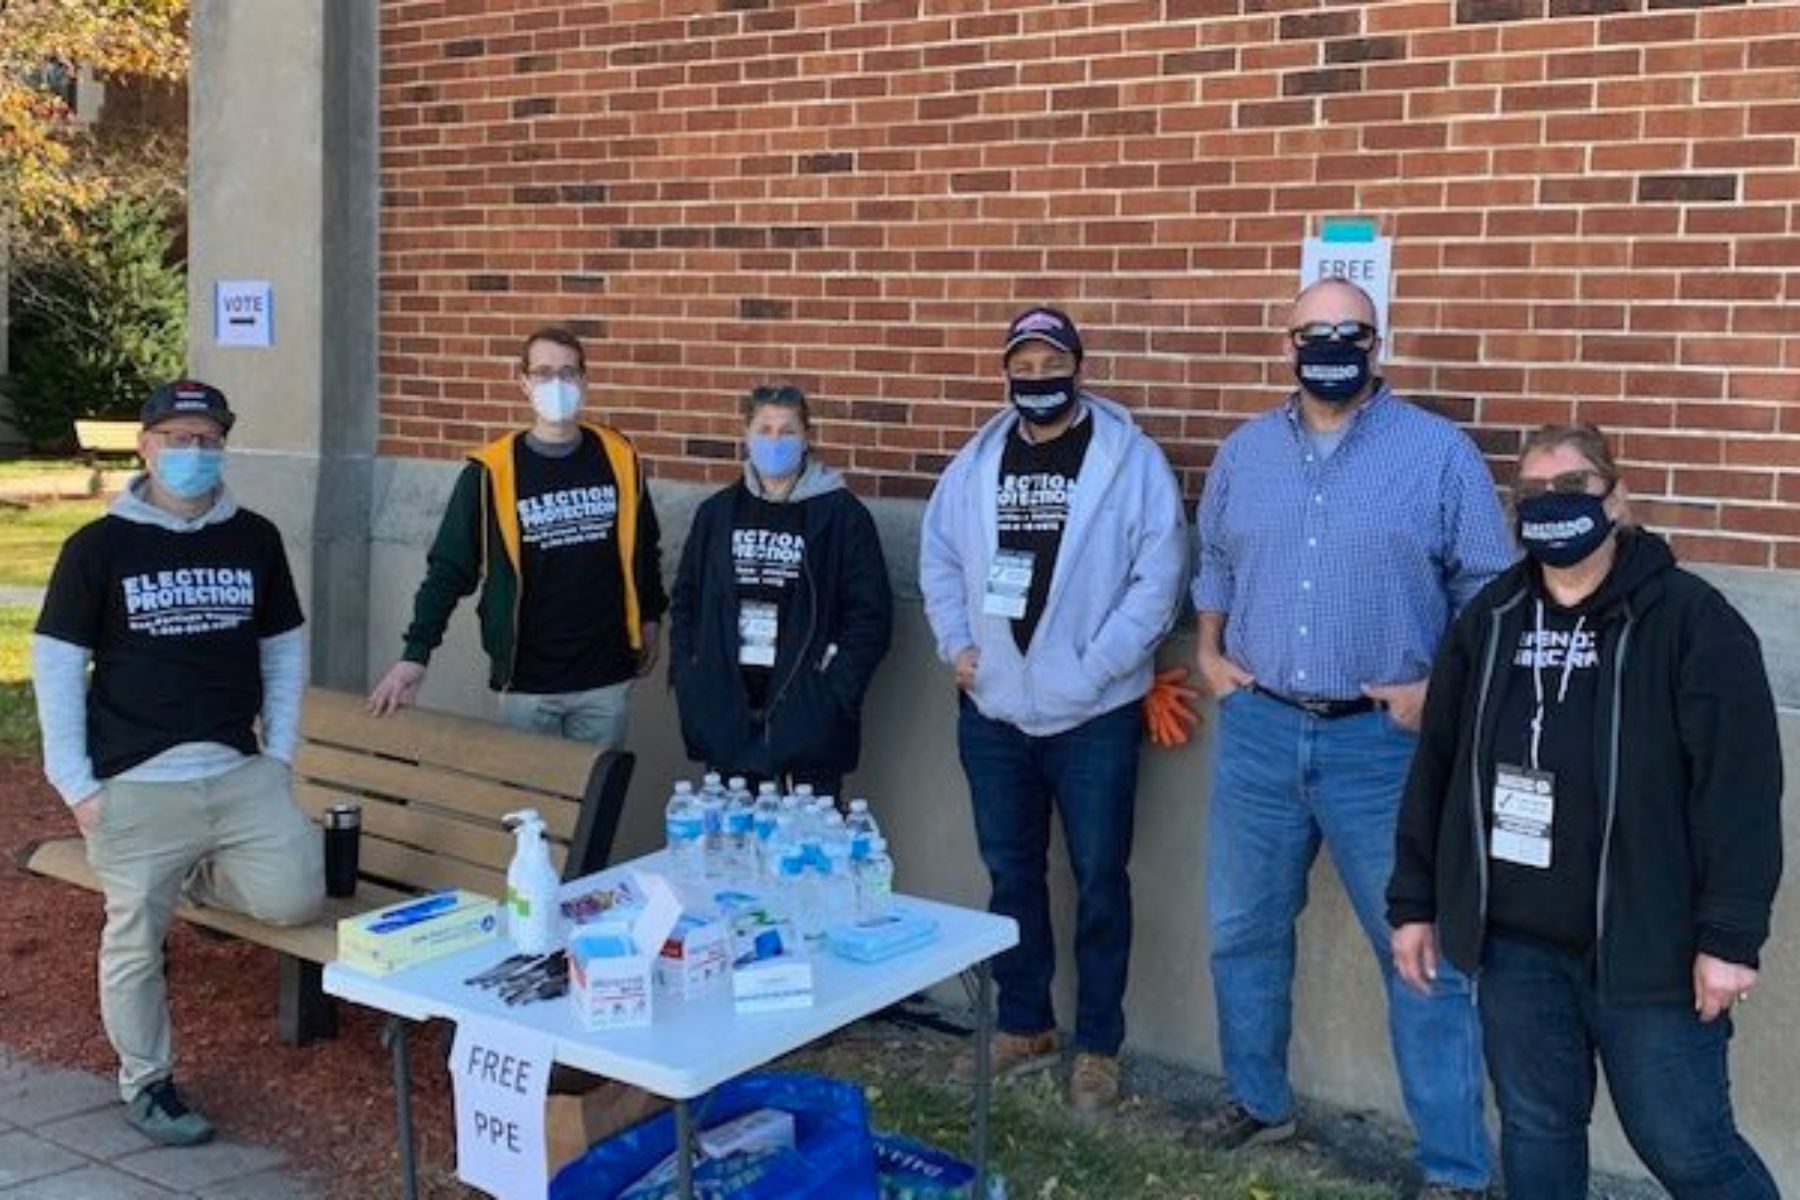 WAVE participated in distributing personal protective gear for the November election. 6 WAVE supporters and volunteers stand at a table with free PPE items